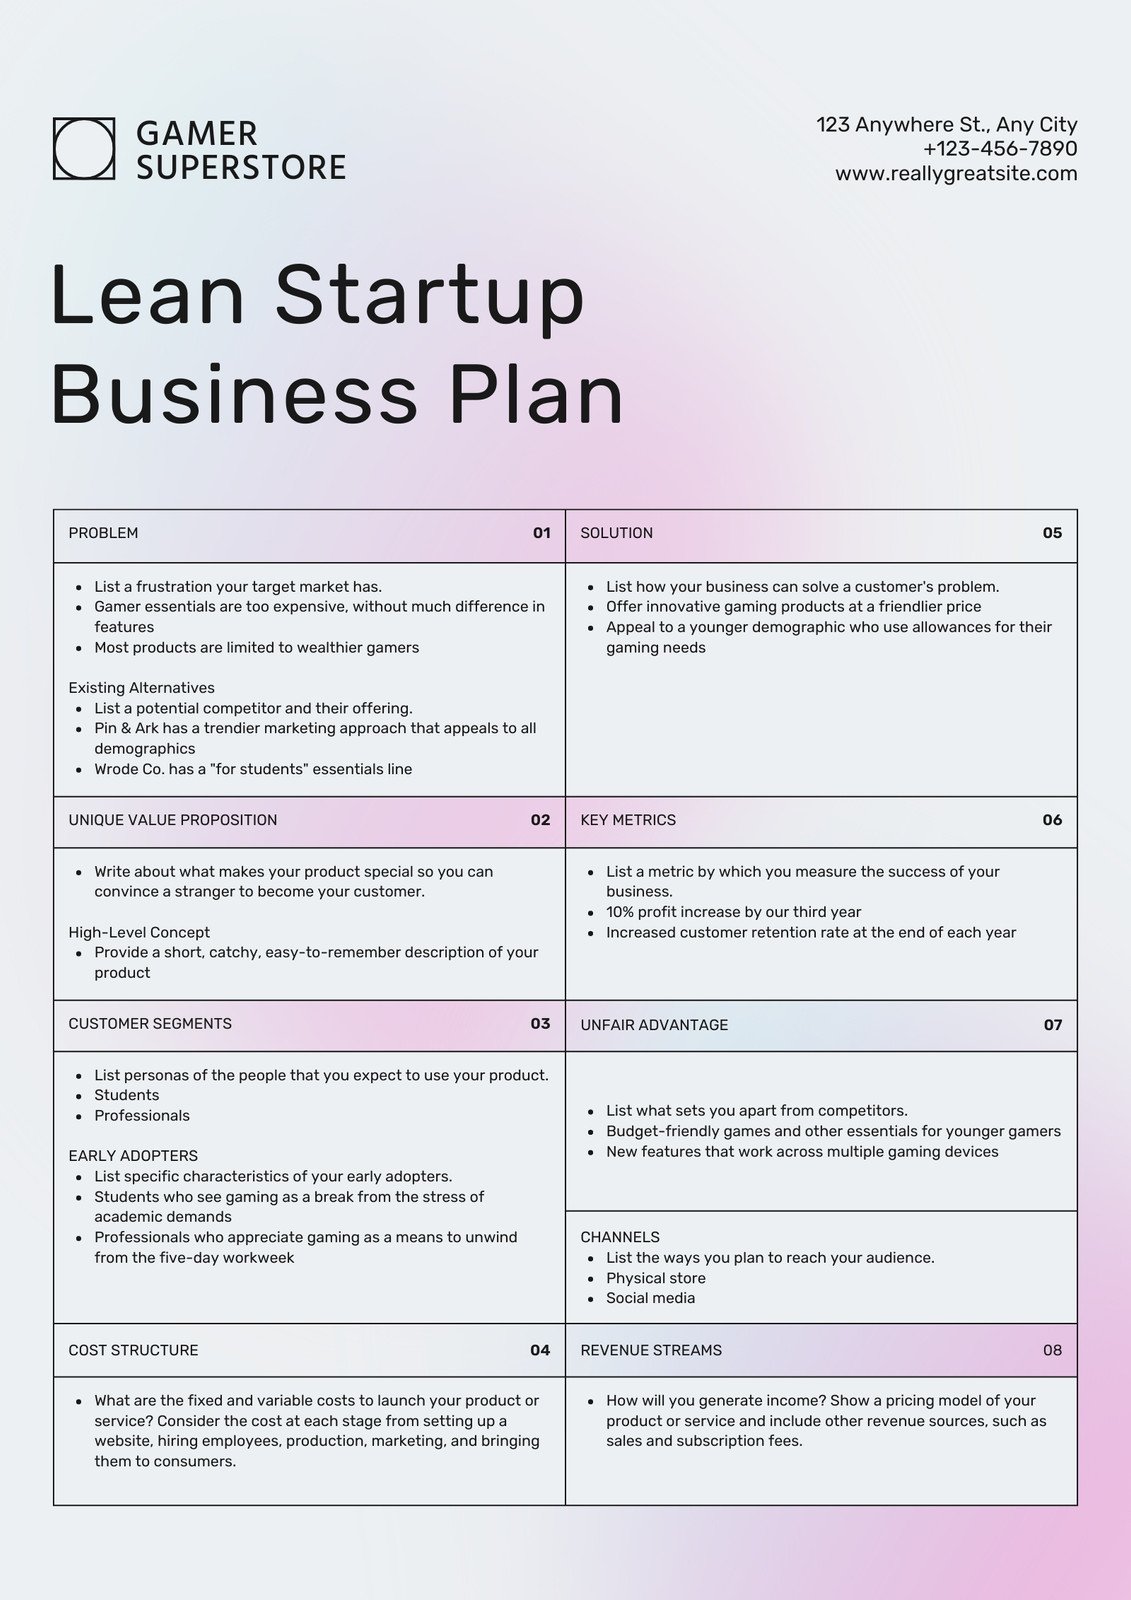 Canva Startup Business Plan In Neon Pink Light Blue Grey Gradient Style PxE7O7E UWo 